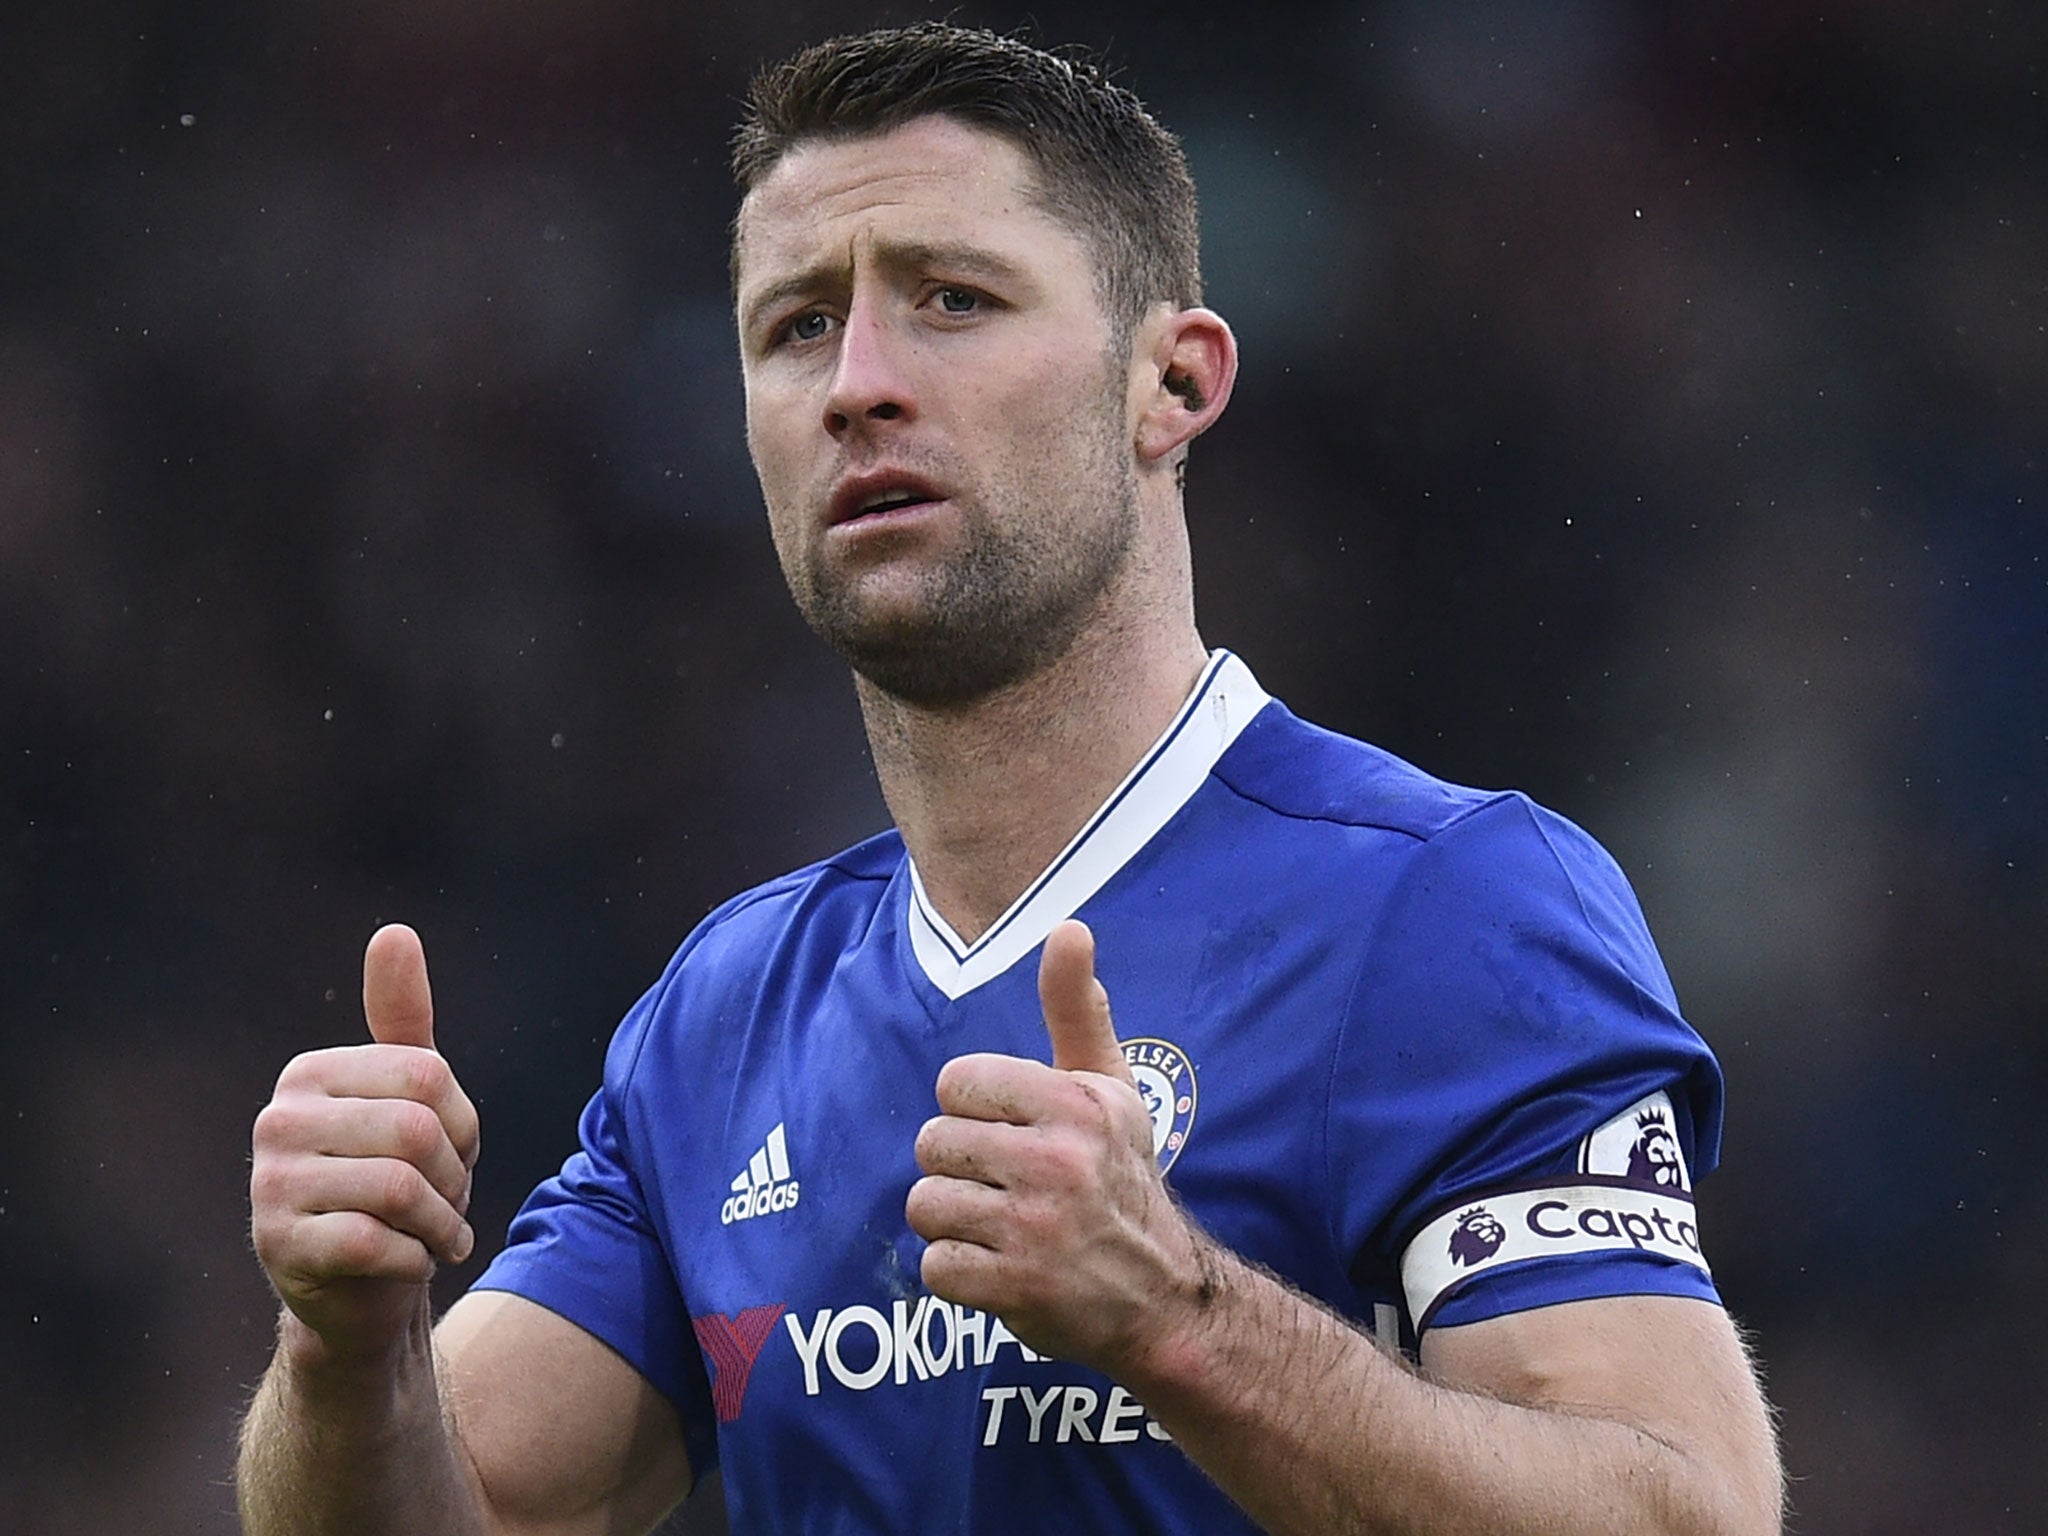 Gary Cahill believes Chelsea are edging towards winning the Premier League title